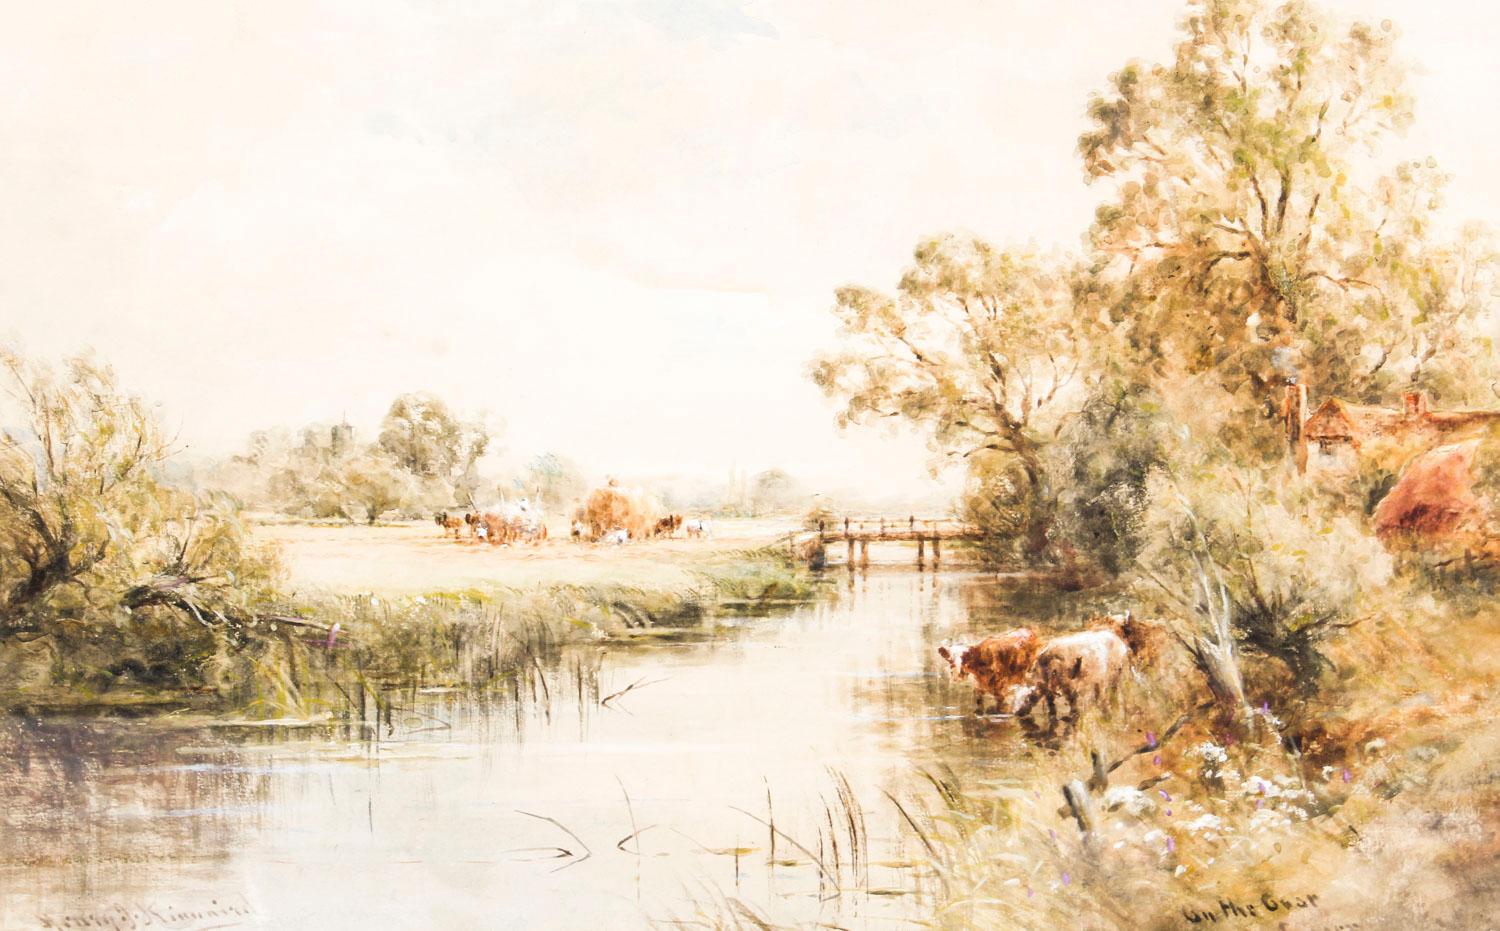 Antique English watercolor landscape by Henry John Kinnaird British, (1861-1929), circa 1880 in date.

This wonderful watercolor titled 'on the Ouse, Sussex' features a tranquil rural English countryside landscape with cows drinking water on the